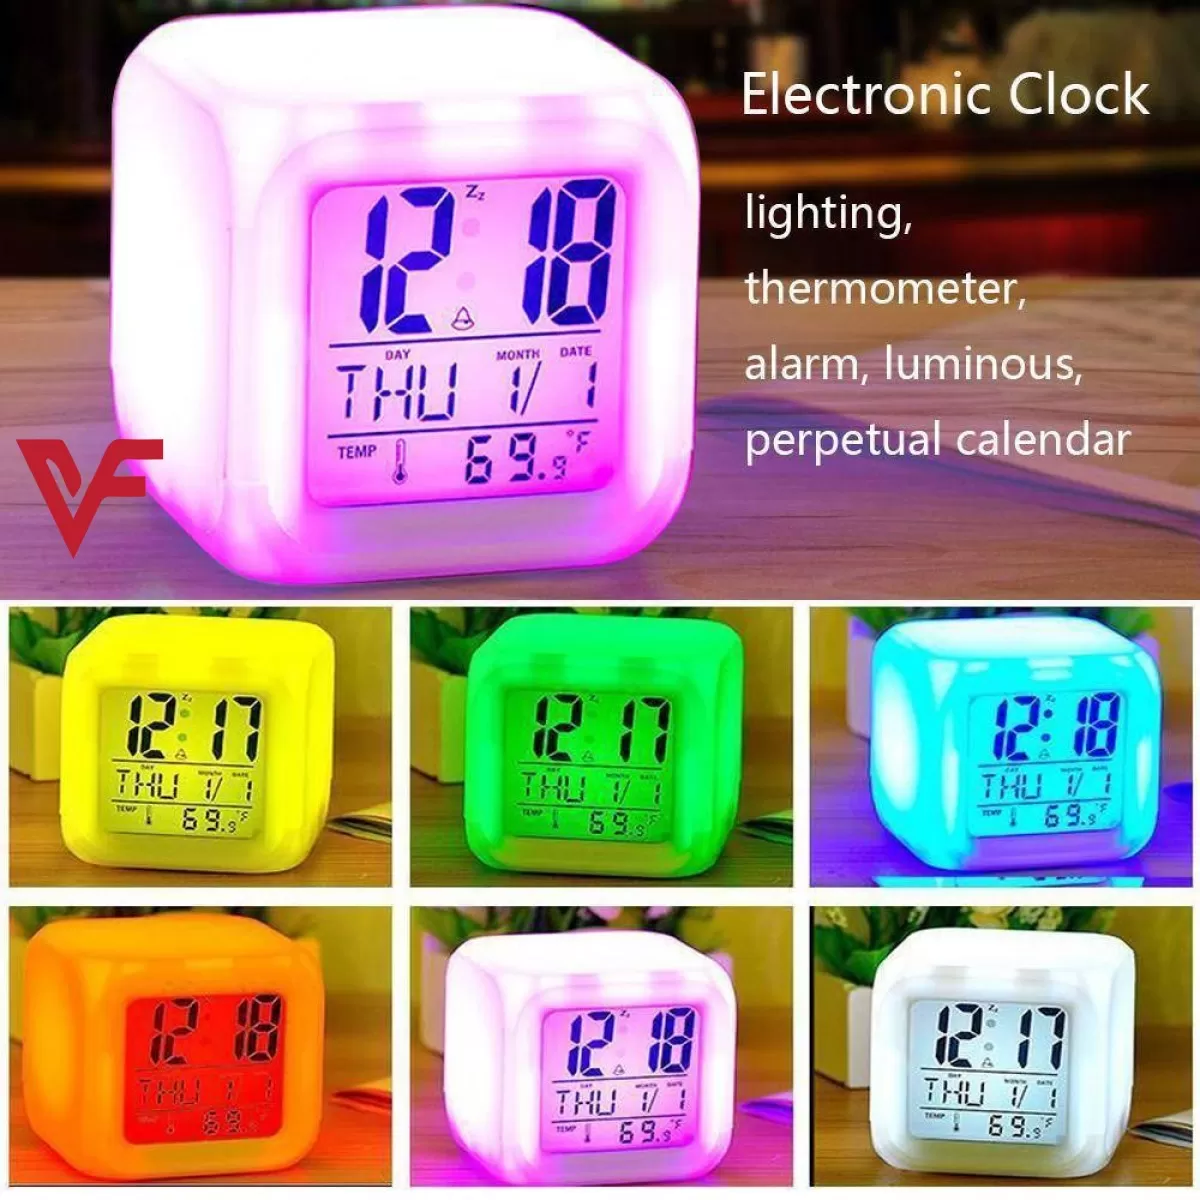 Digital Table Clock 7 Color Changing Led Lights Big Size Digital Screen Temperature & Calendar Battery Operated Glowing Led Table Alarm Clock Dice